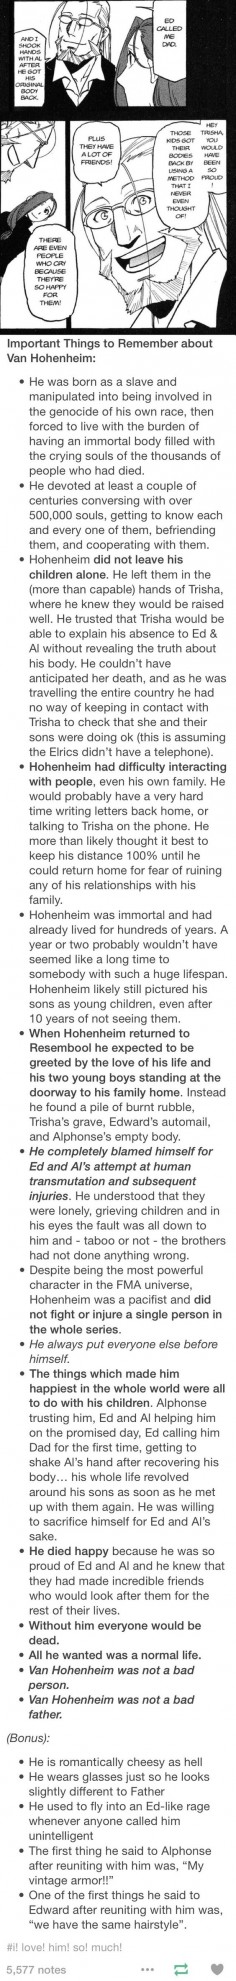 Why Hohenheim is my favorite and gives me all the feels. Plus he reminds me of my own dad. :)